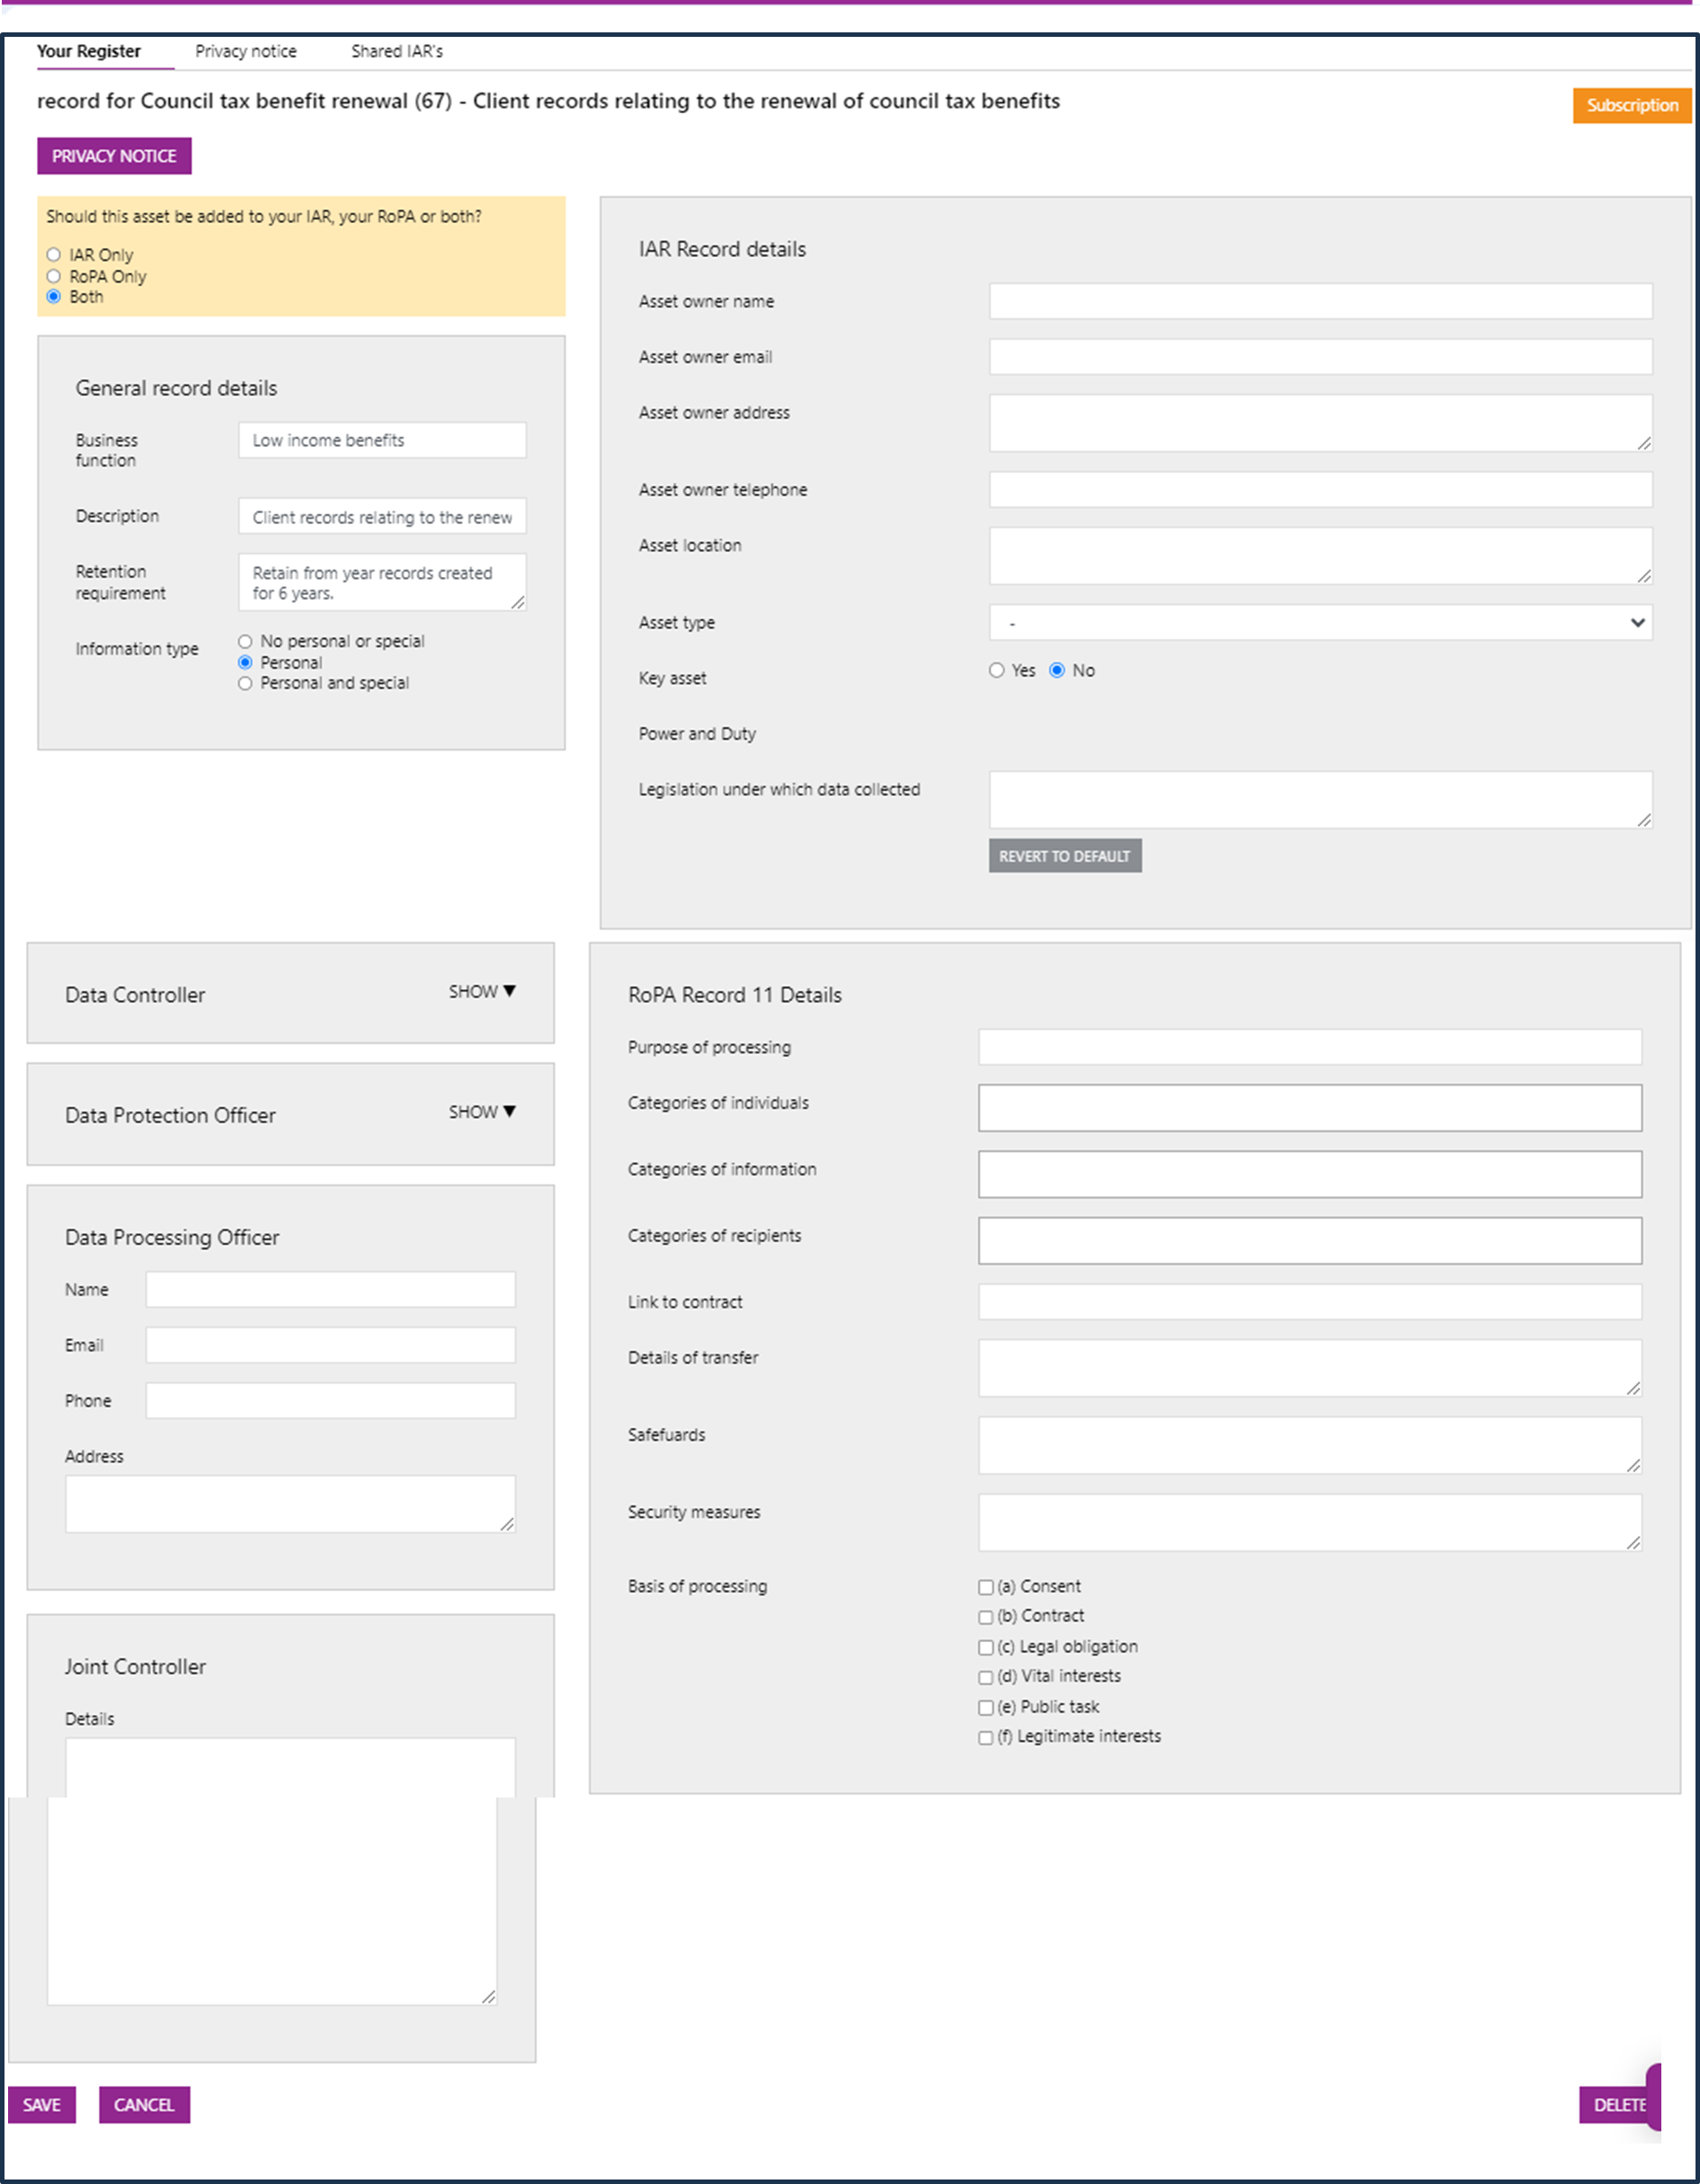 A screenshot of the RoPA application